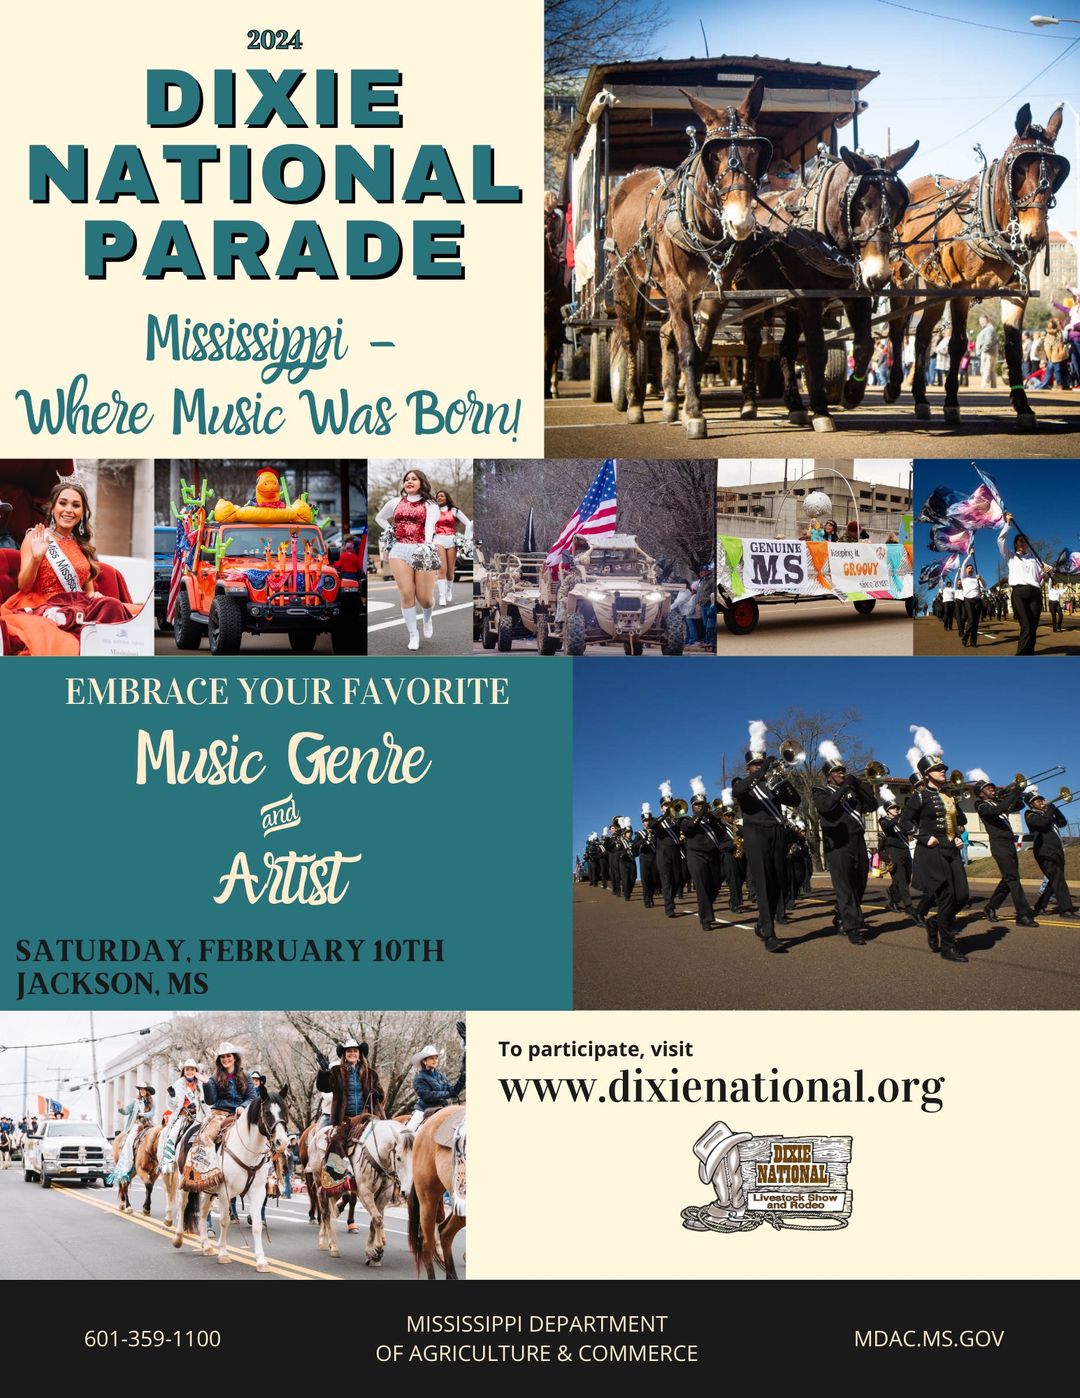 2024 Dixie National Parade: “Mississippi – Where Music Was Born!”